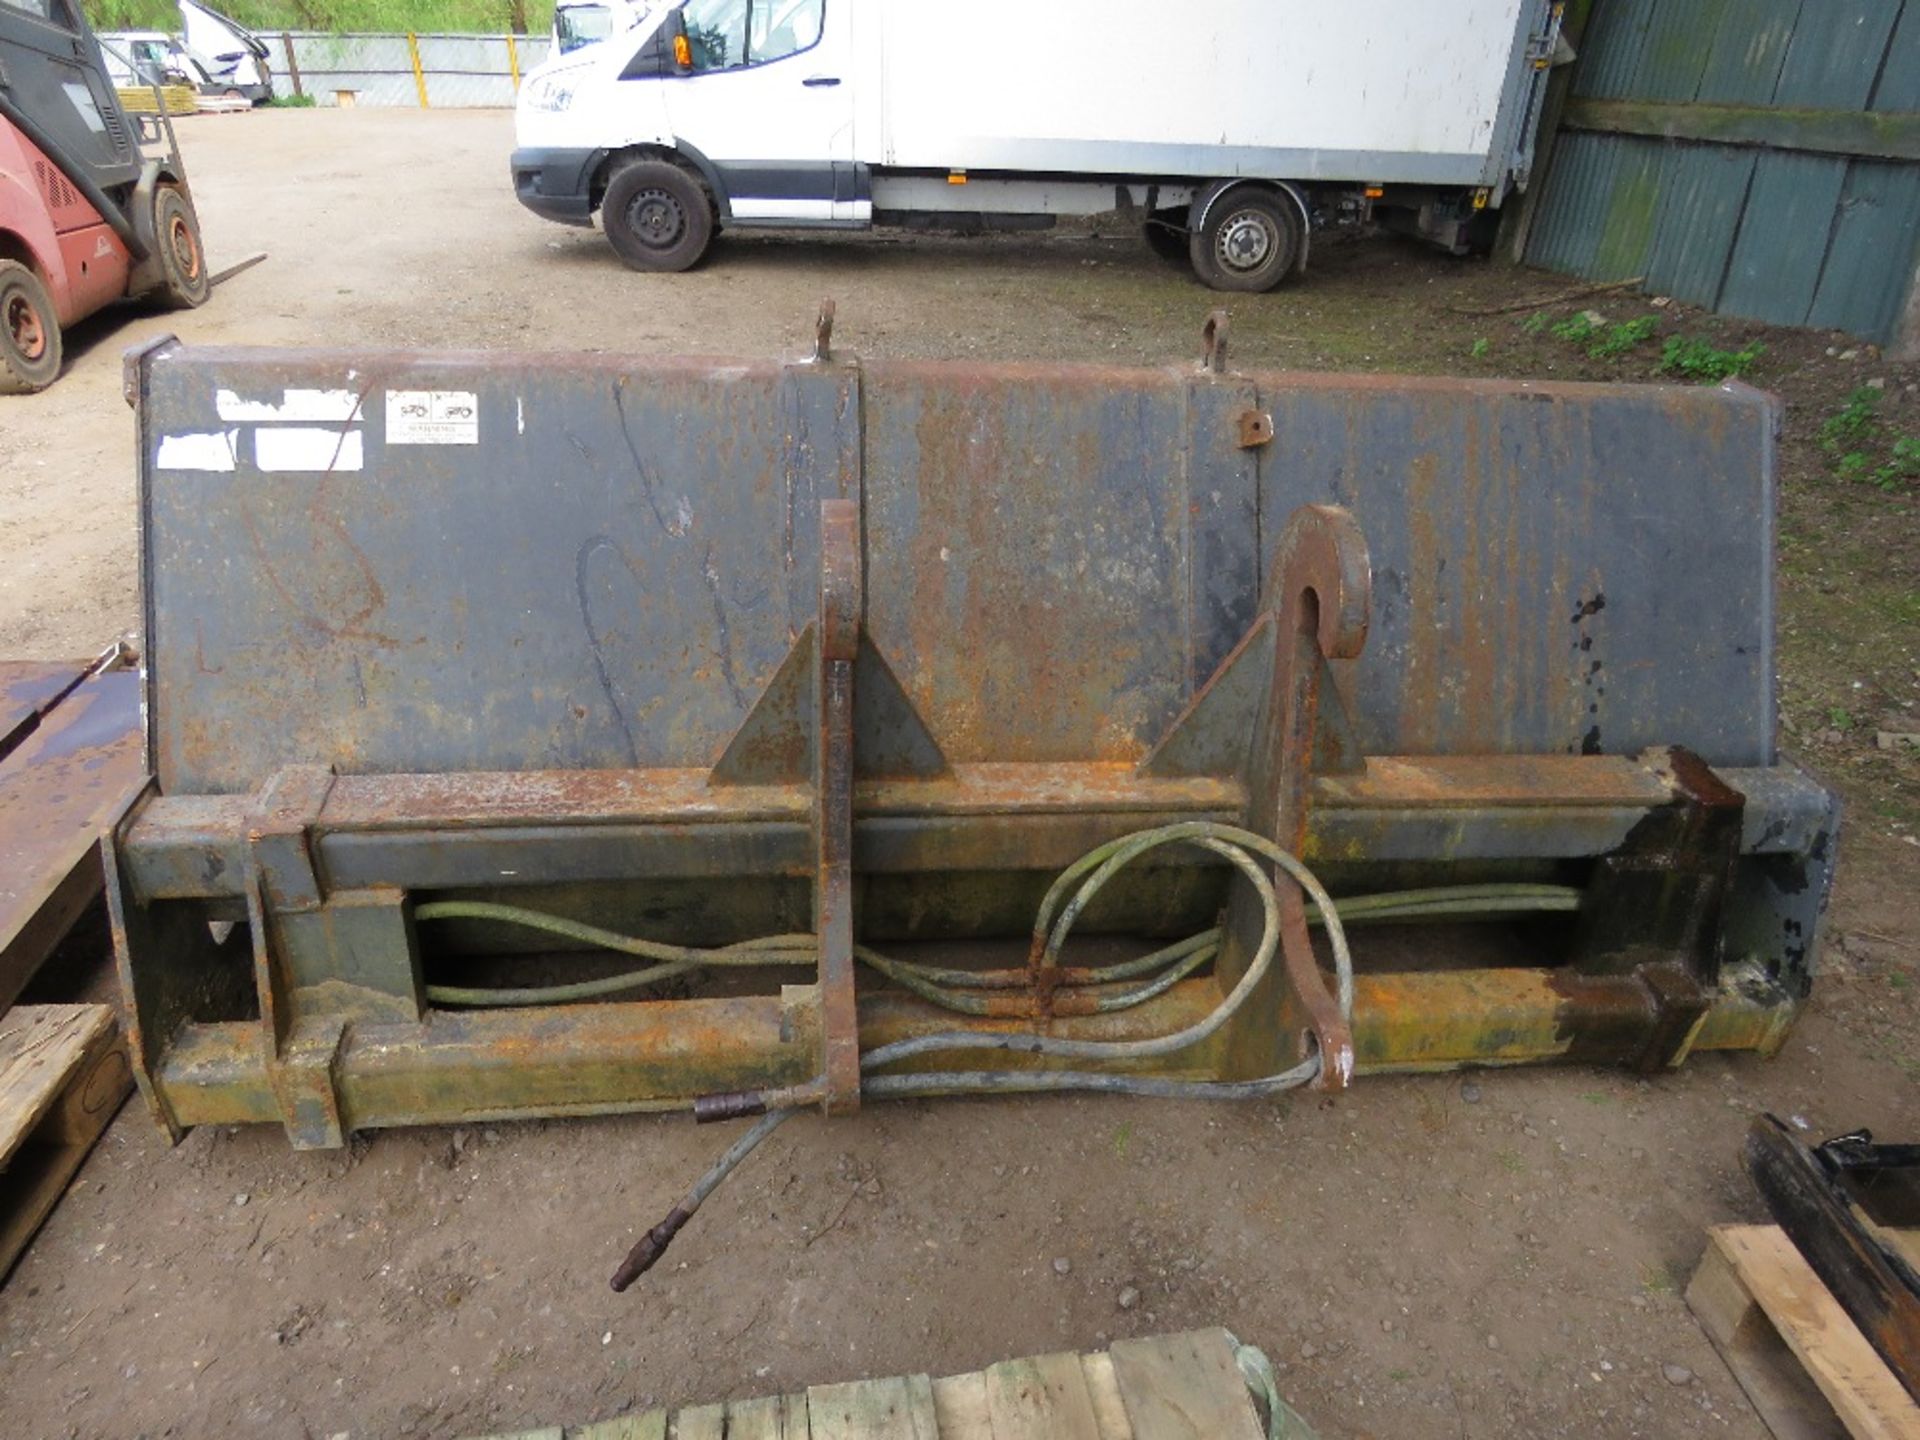 STRIMECH TOE TIP BUCKET, 2.4M WIDTHA PPROX, HEAVY DUTY BRACKETS FITTED. APPEARS LITTLE USED.....THIS - Image 7 of 7